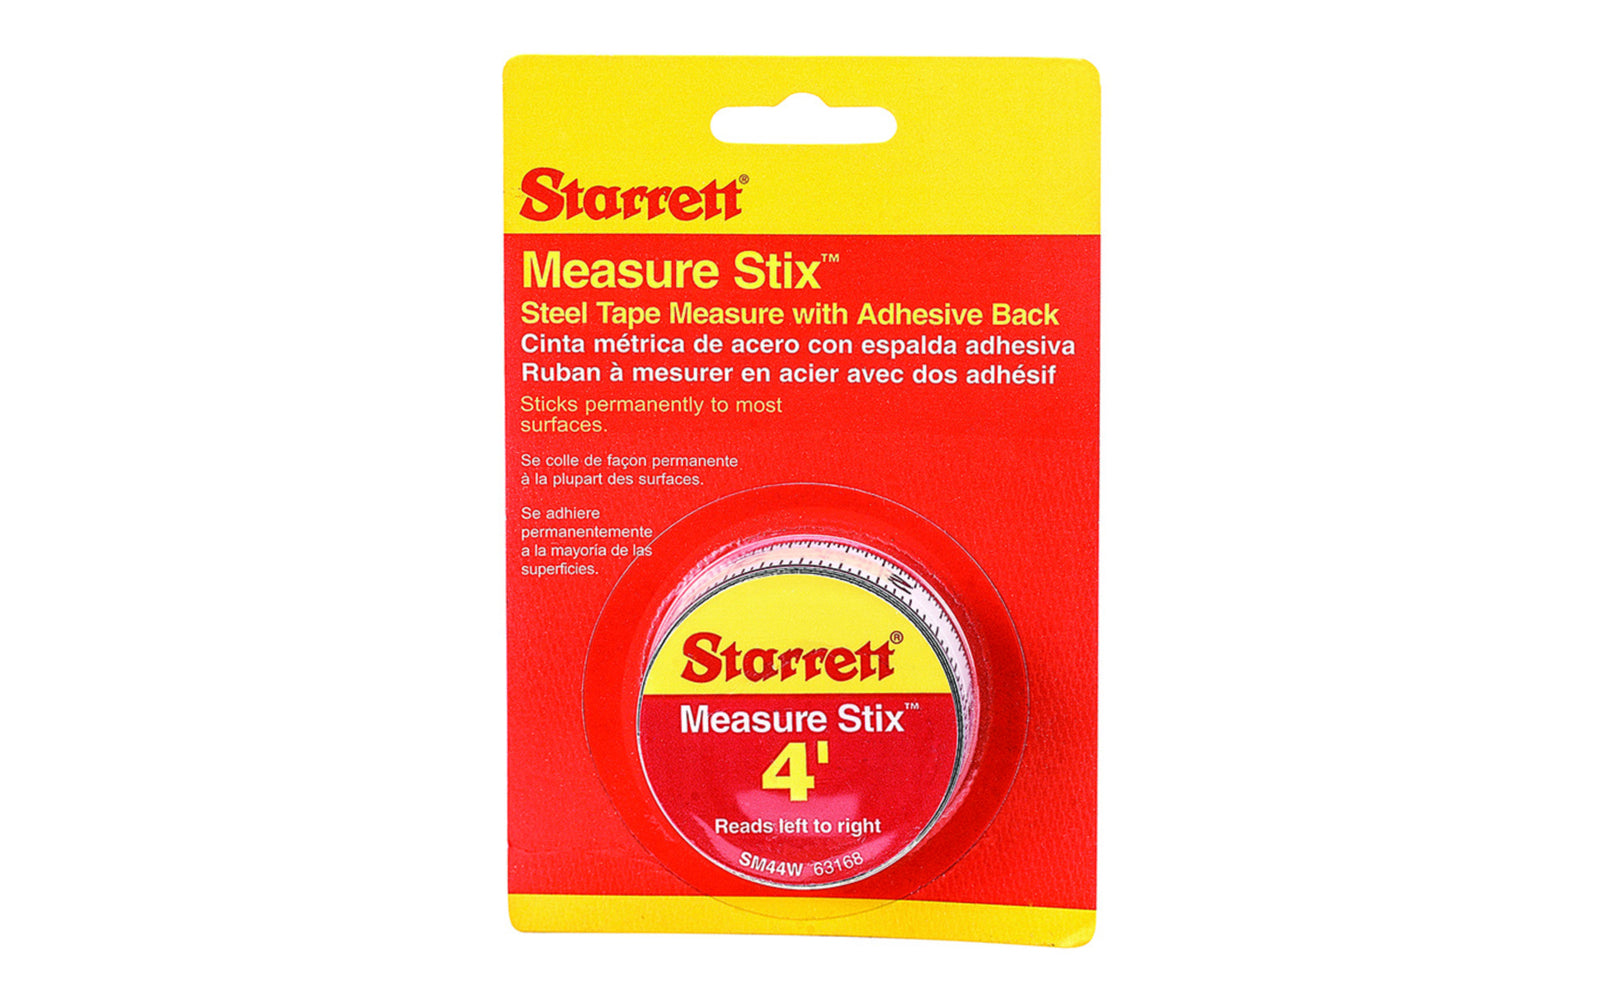 Starrett 4' Measure stix is manufactured with high quality precision steel. Produced with a permanent adhesive backing providing convenient, at-a-glance measurements. Can be mounted on work benches, saw tables, drafting tables, and more. The stix easily cut to proper size with scissors. Reads with left to right.